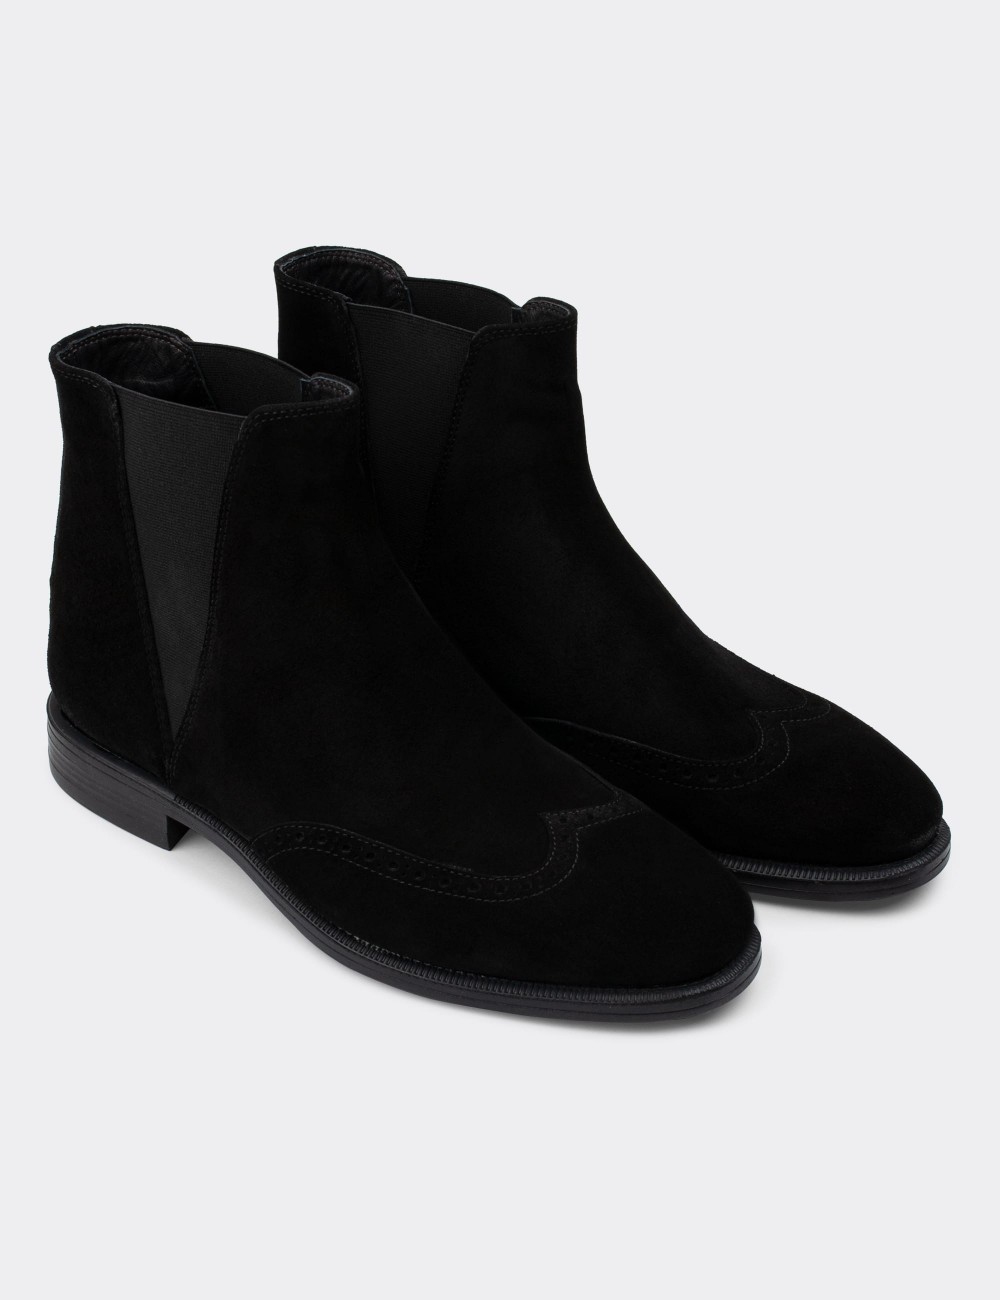 Black Suede Leather Chelsea Boots - 01816MSYHC02